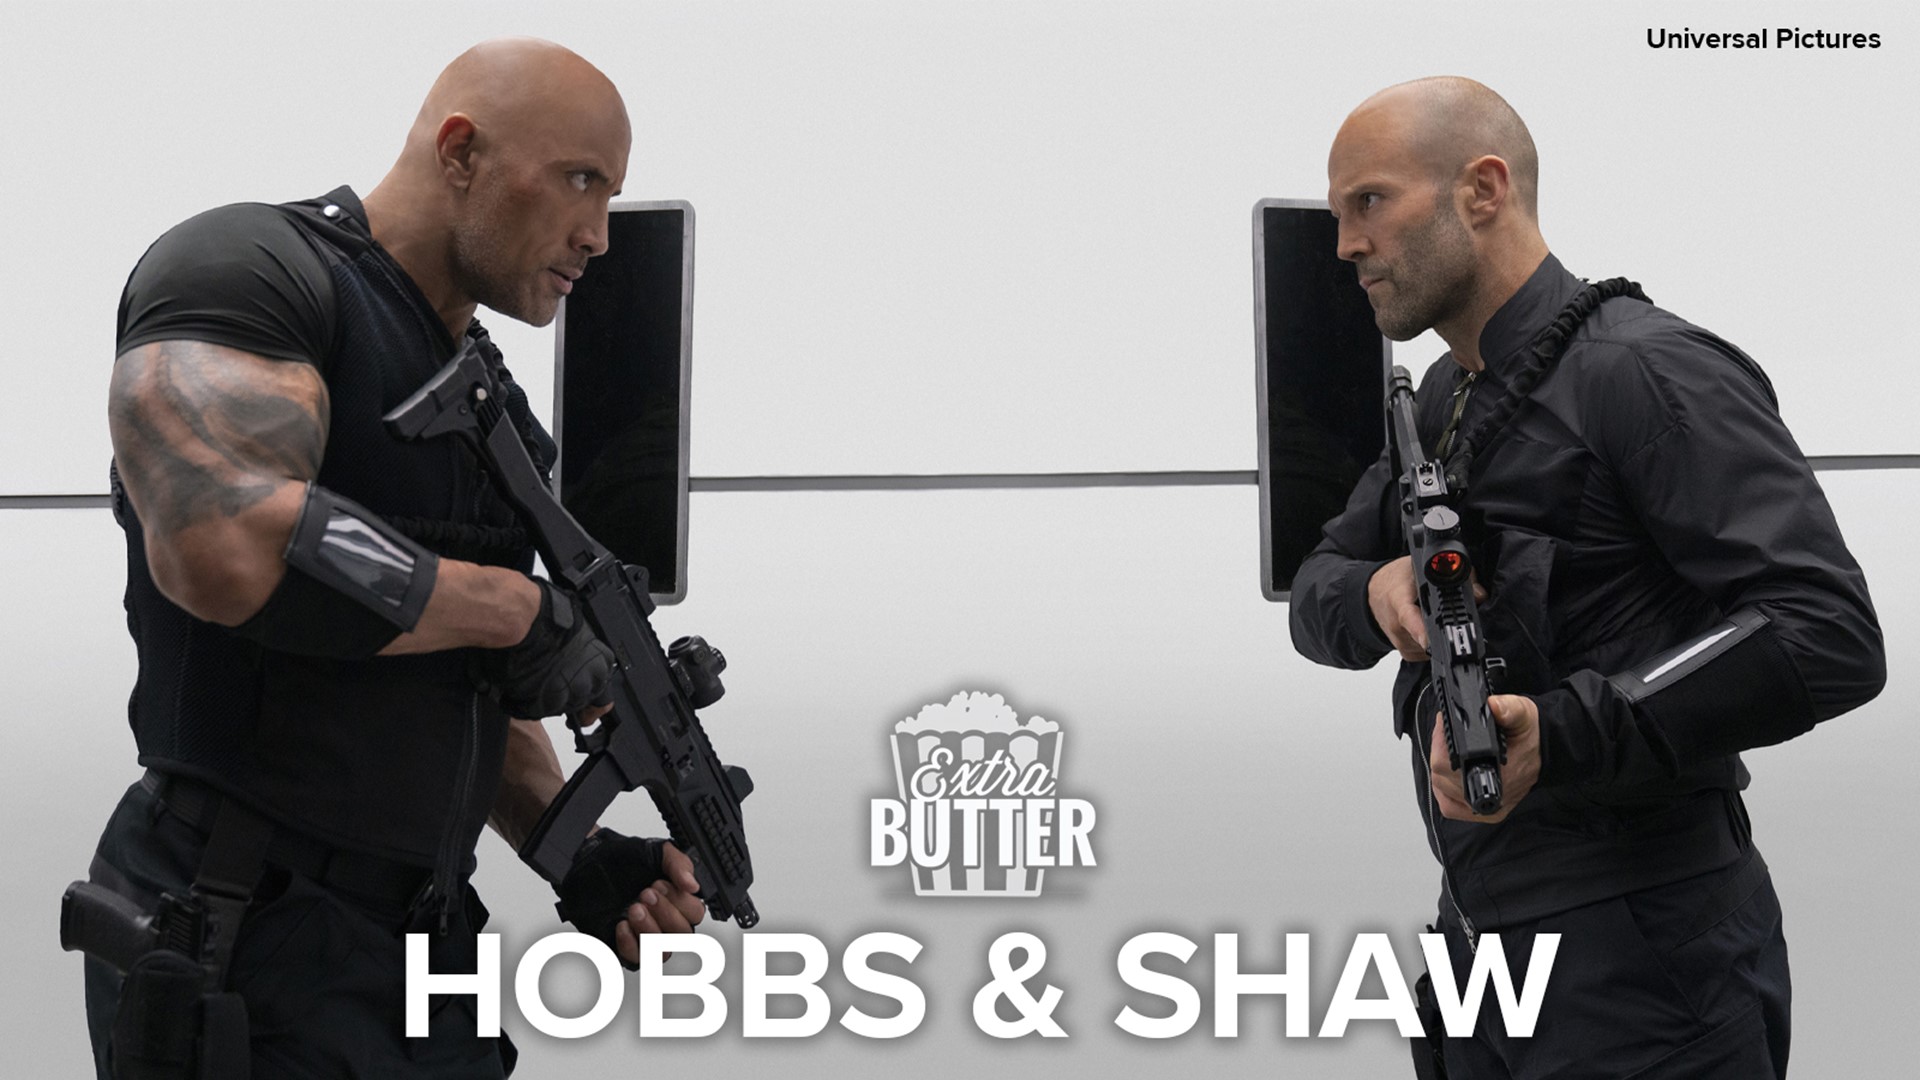 ‘Hobbs & Shaw’ may not be the flashiest movie in the ‘Fast & Furious’ franchise, but Dwayne Johnson and Jason Statham deliver plenty of fun and action.